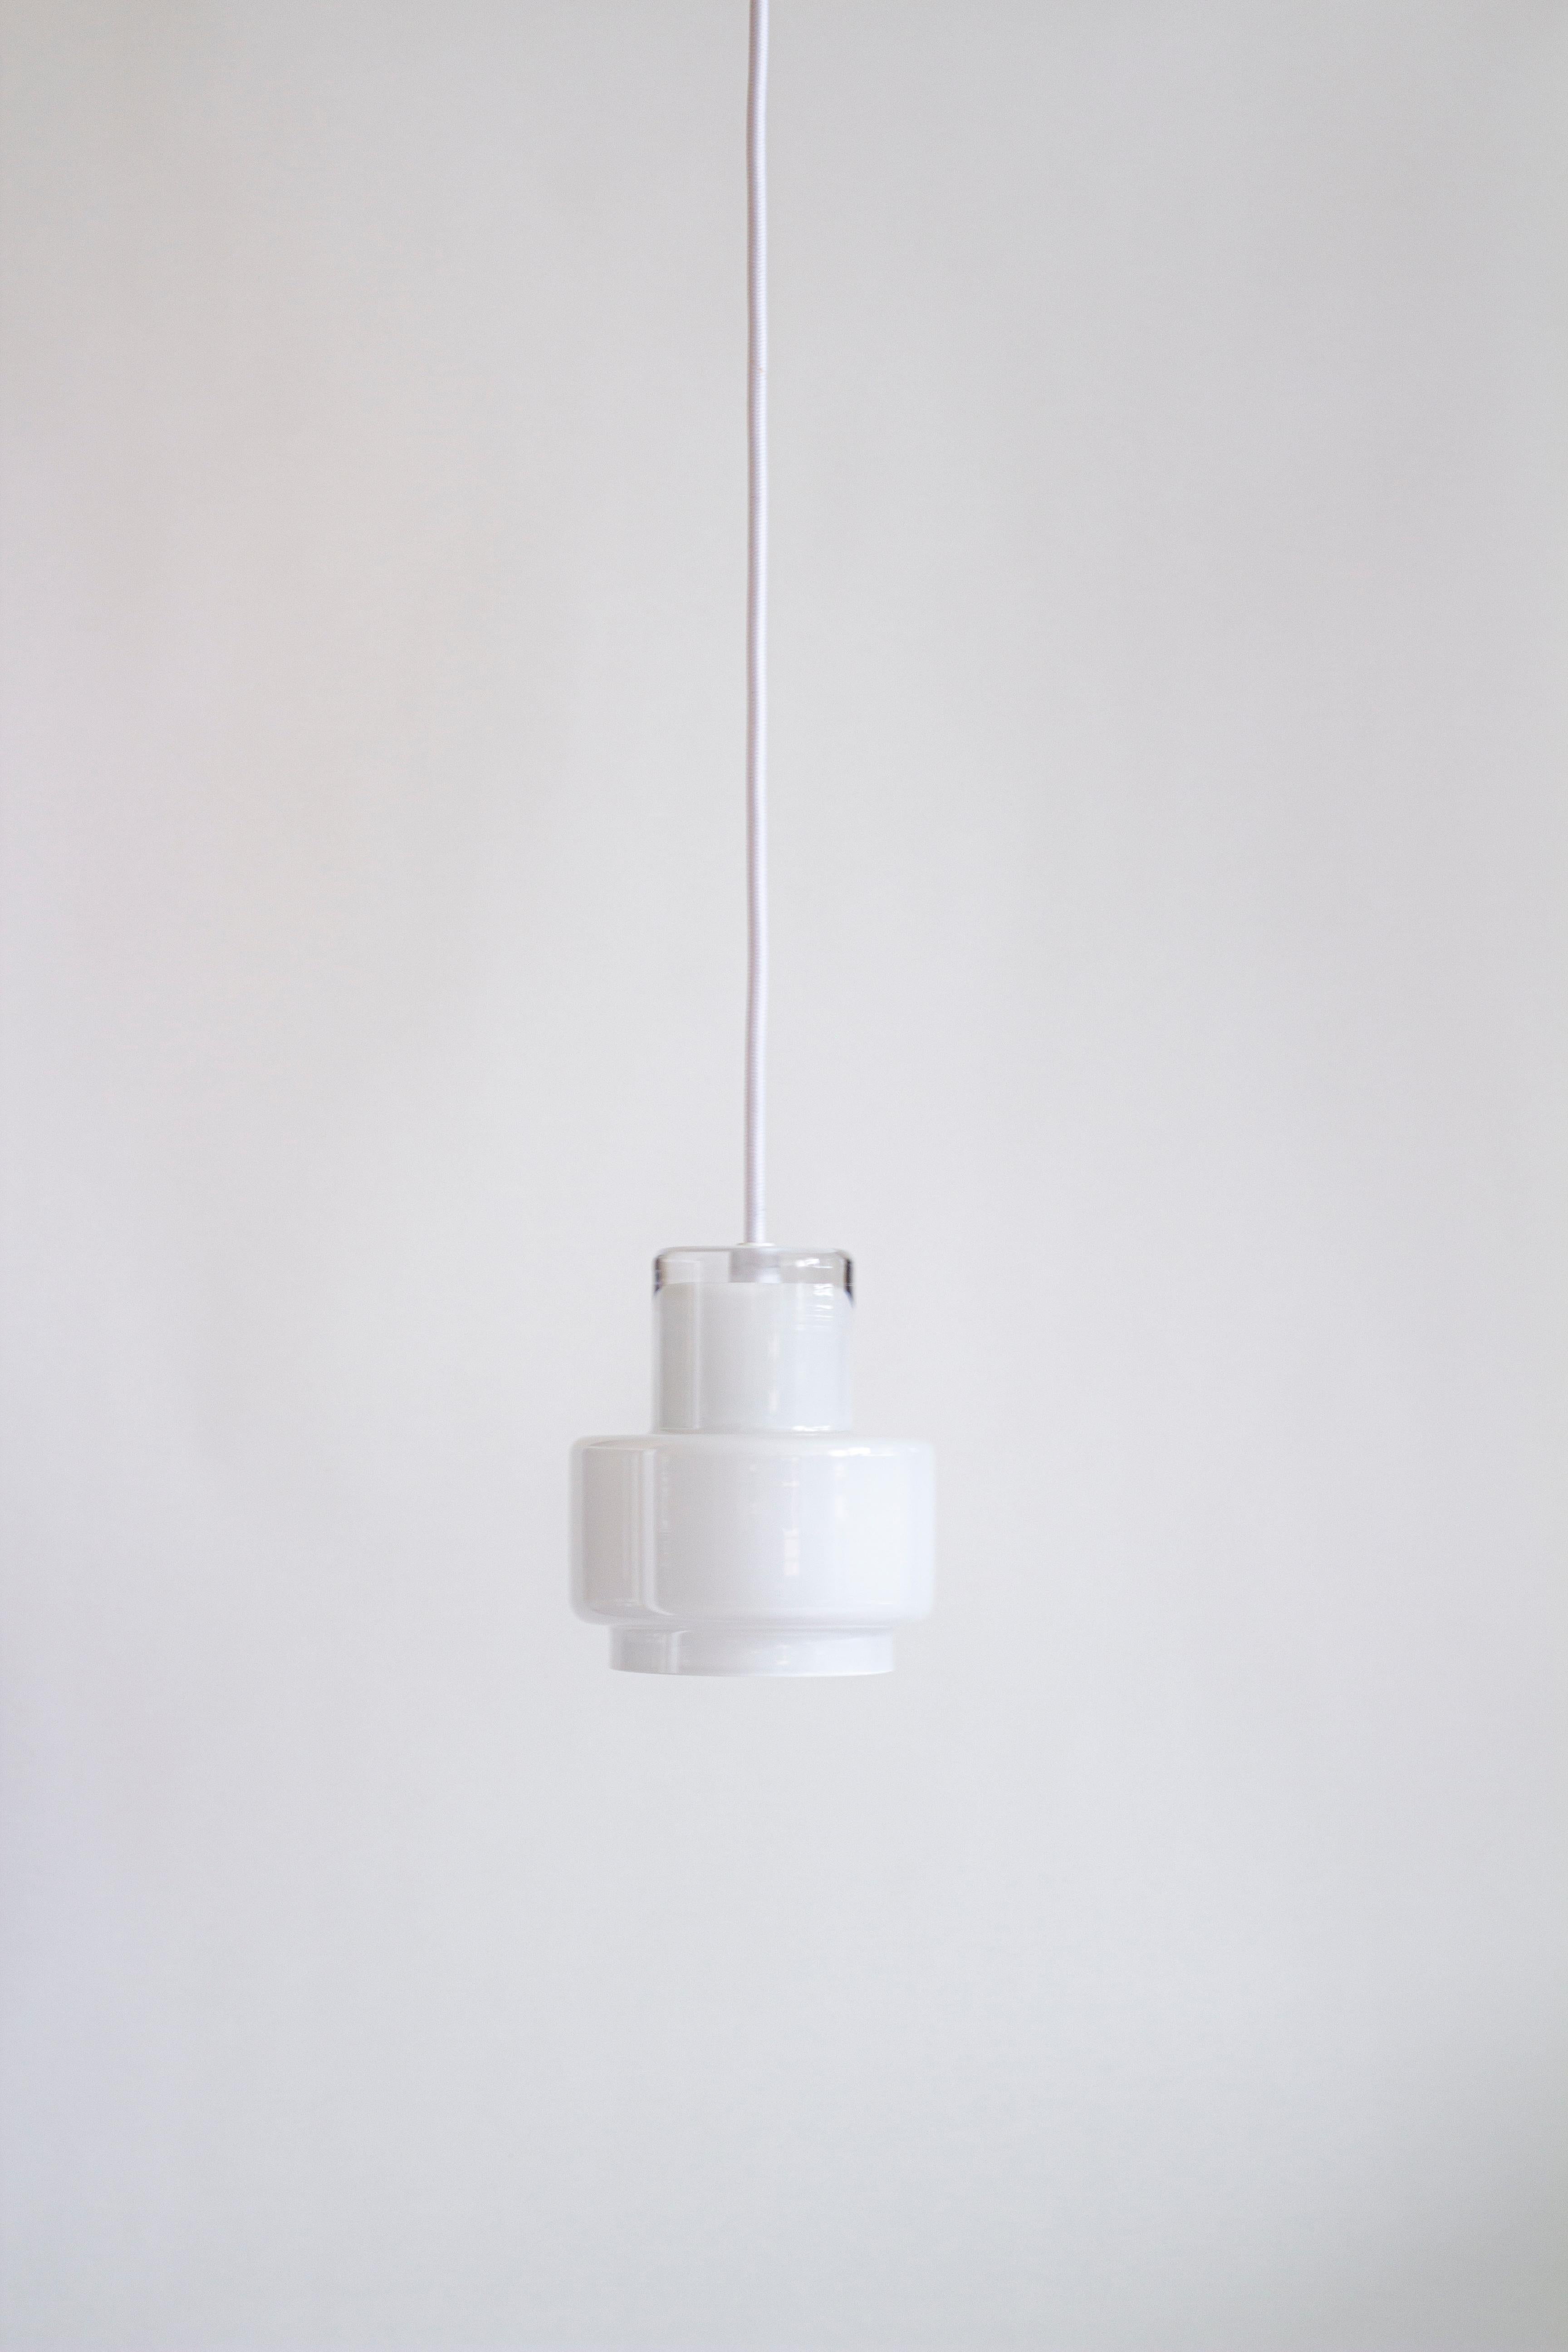 'Multi M' Glass Pendant in White by Jokinen and Konu for Innolux For Sale 5